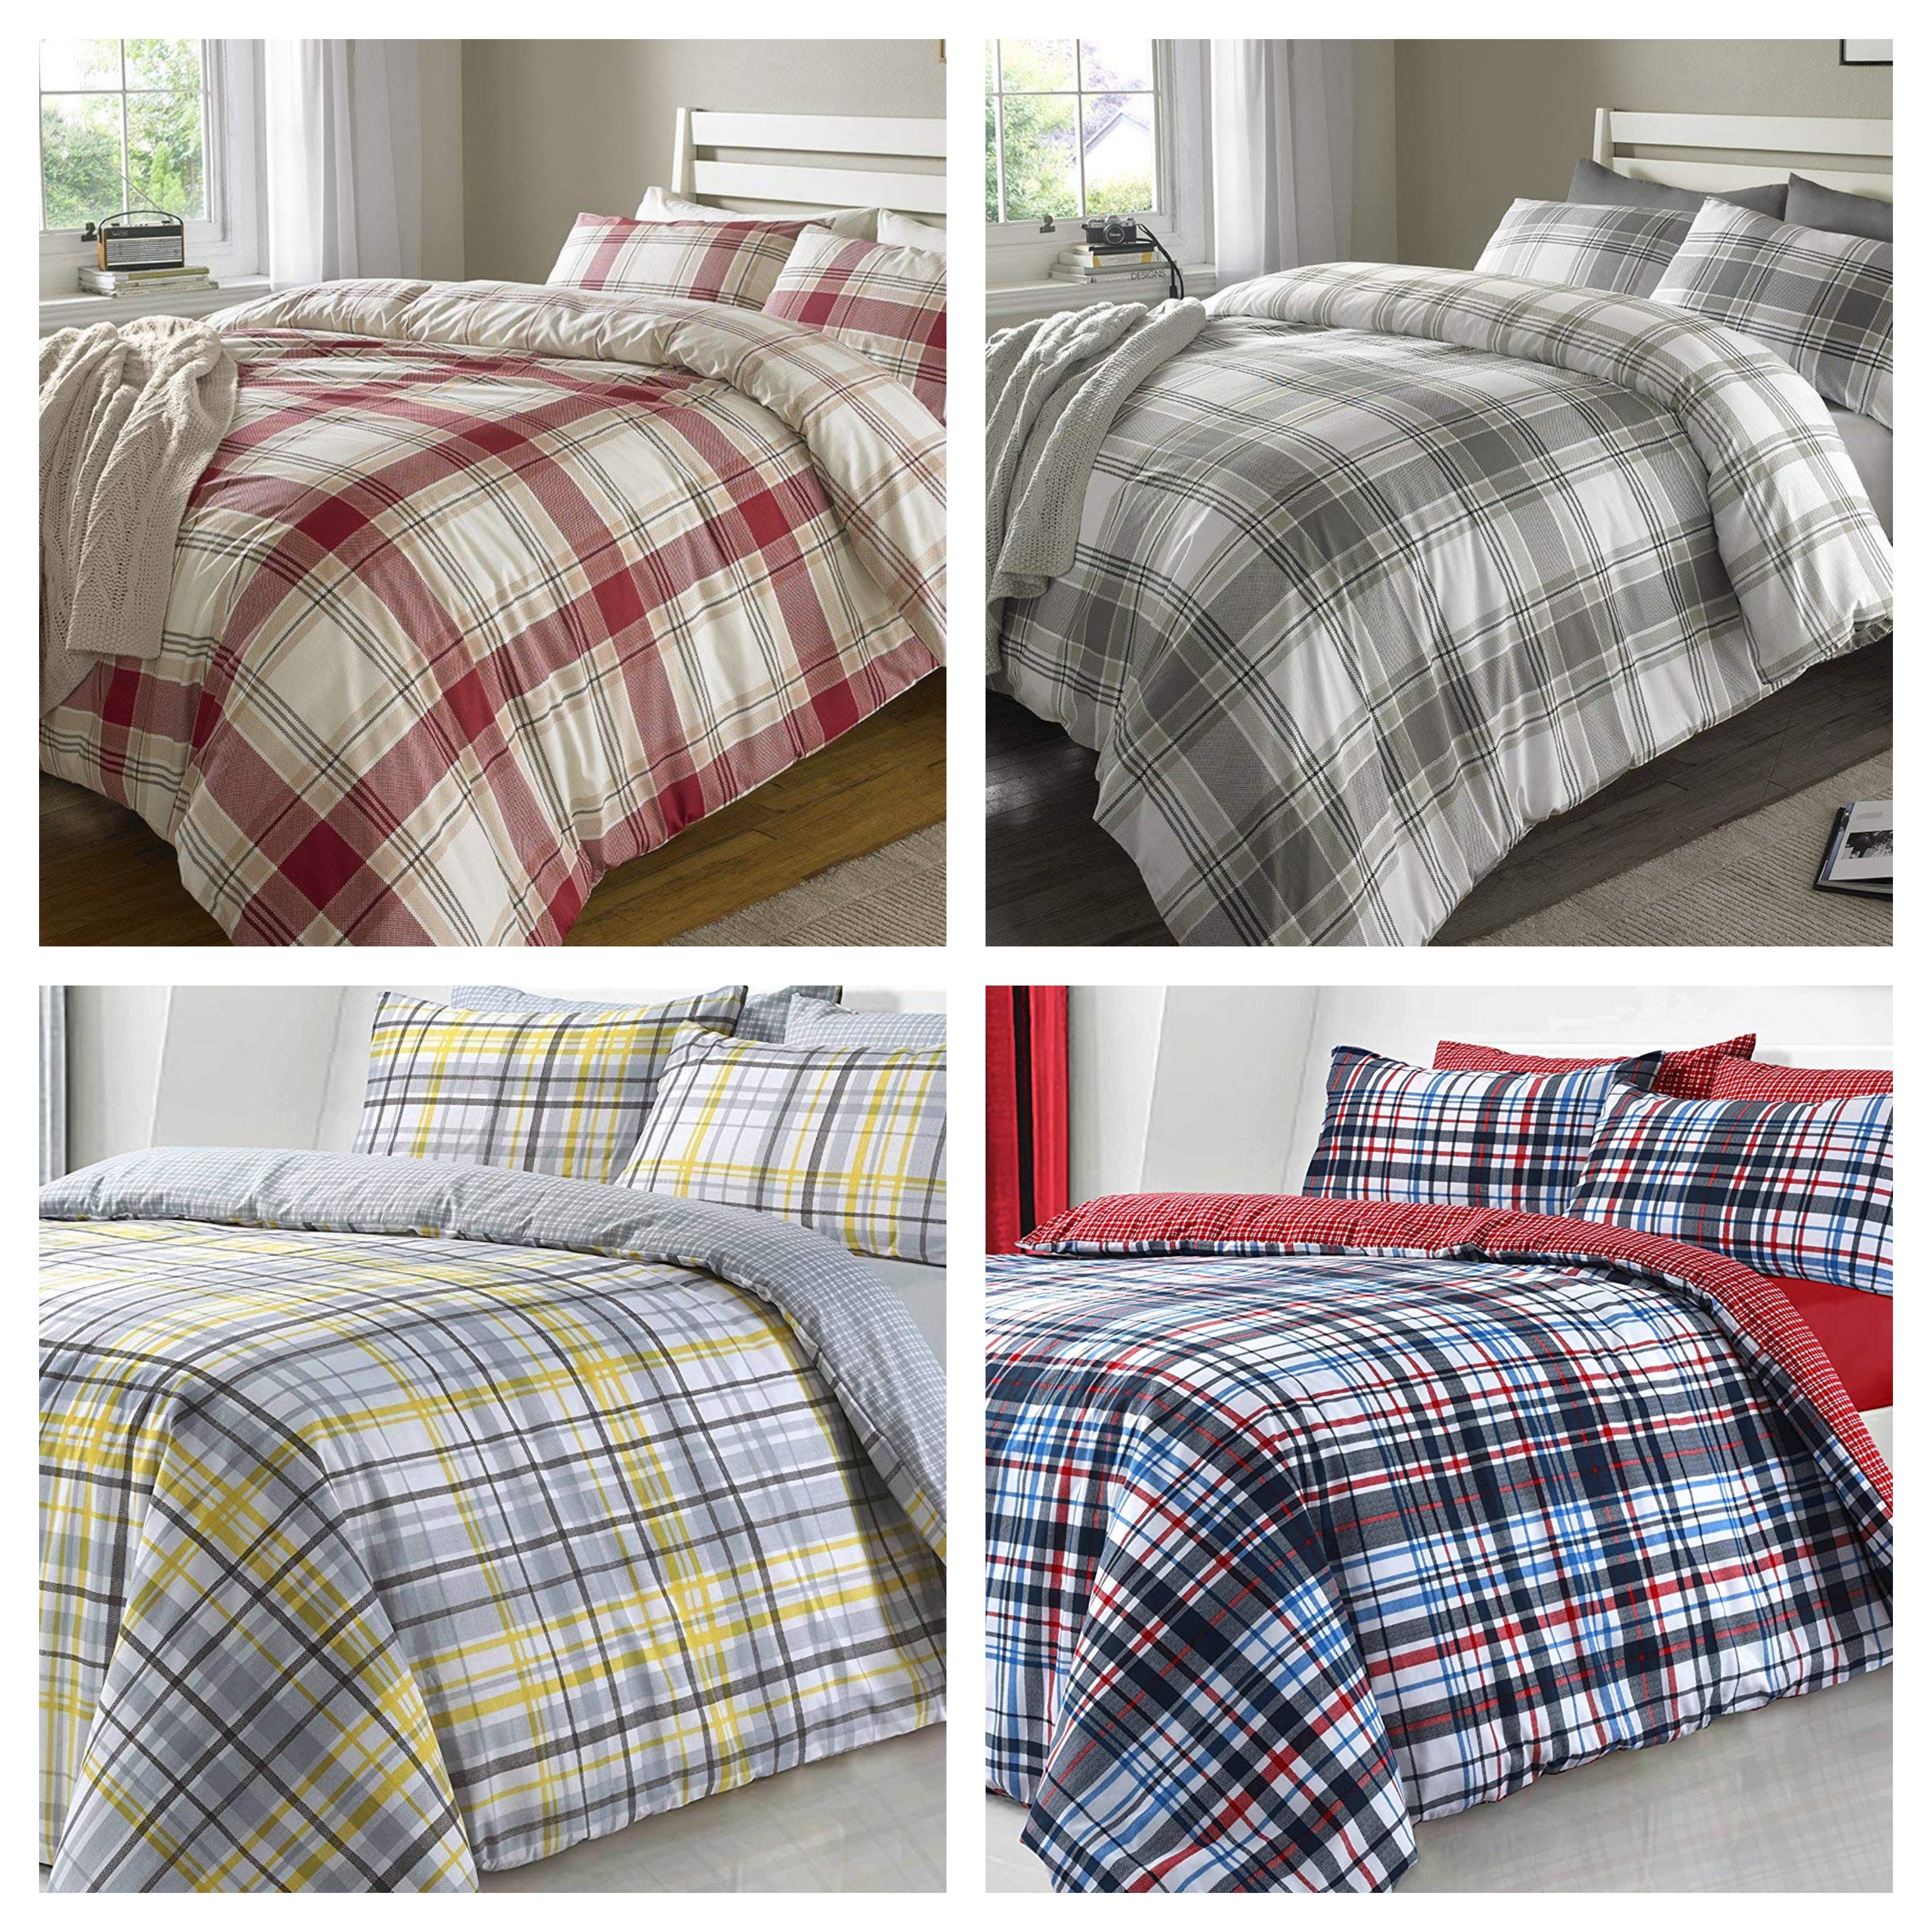 Modern Checked Print Duvet Quilt Cover Bed Sets Grey Red